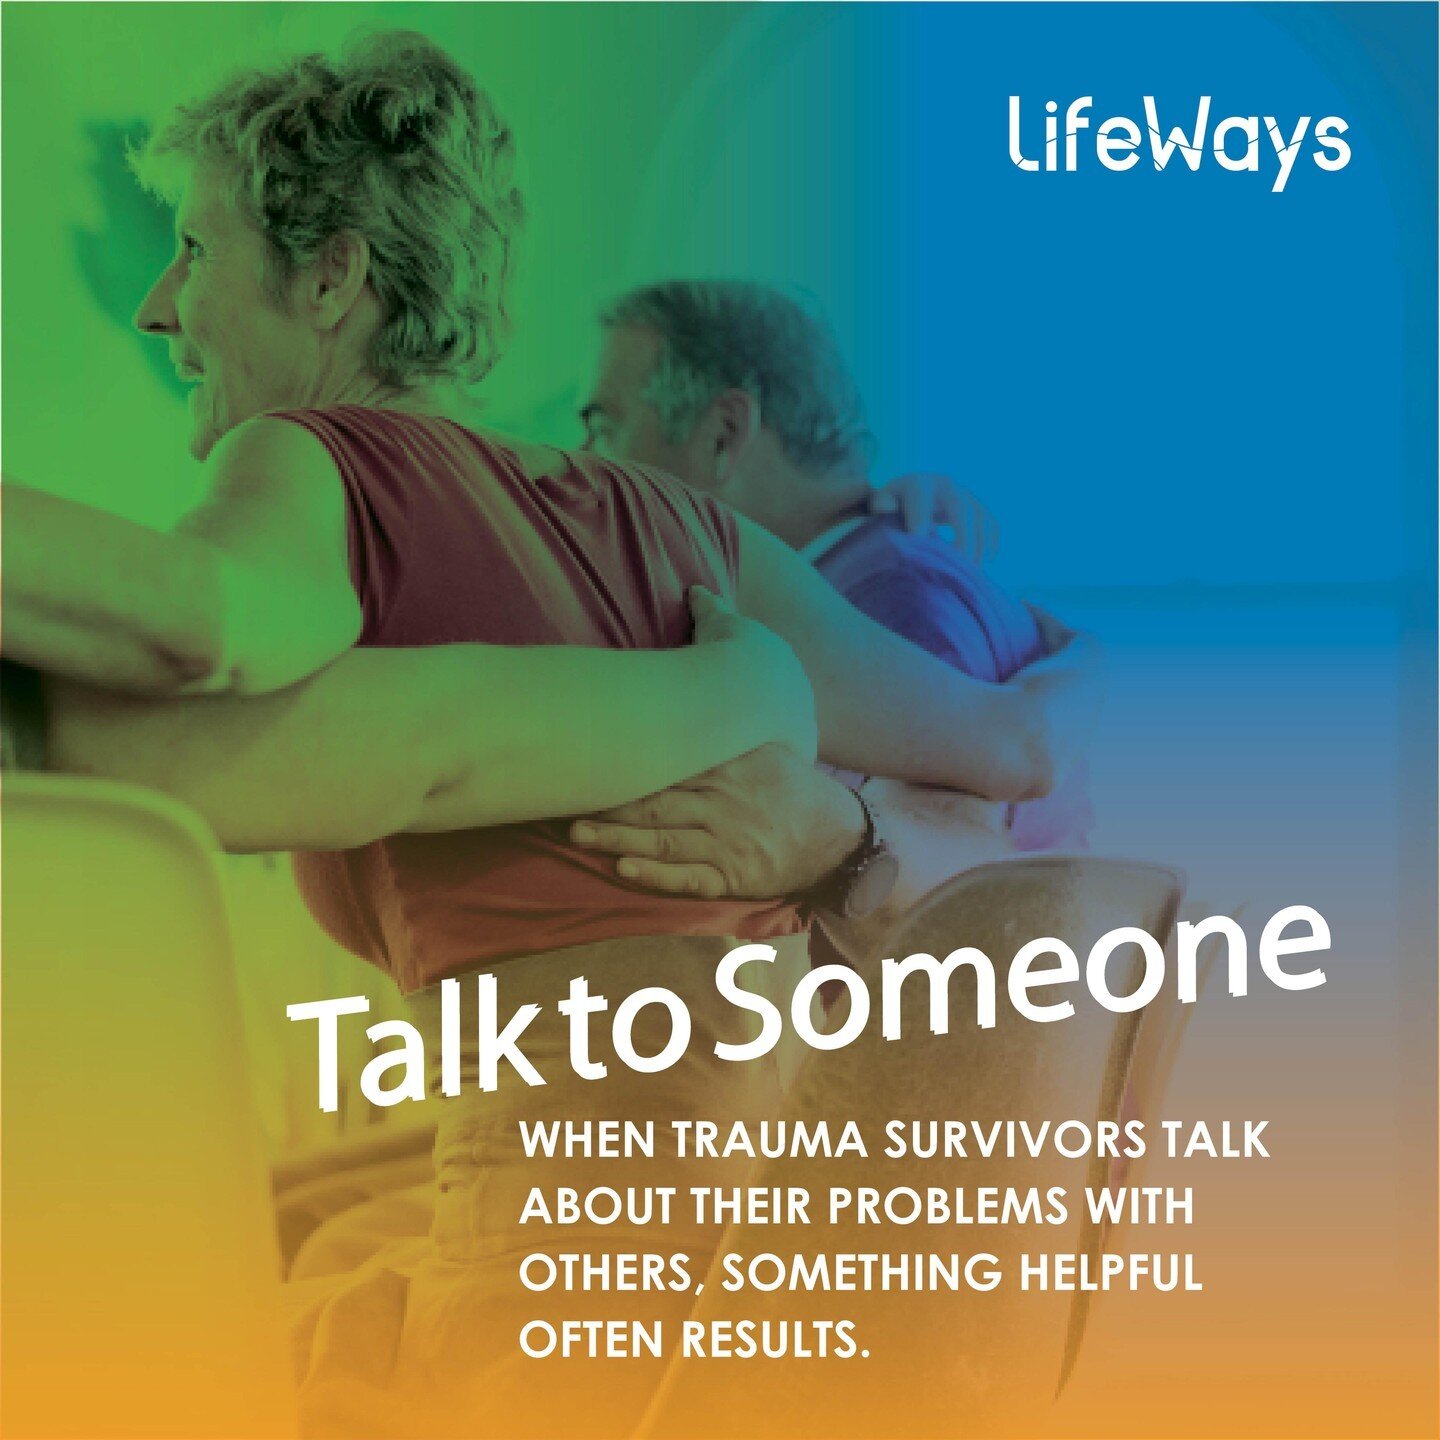 June is Posttraumatic Stress Disorder (PTSD) Awareness month!

Talk to others for support! When trauma survivors talk about their problems with others, something helpful often results. It is important not to isolate yourself. Instead, make efforts to